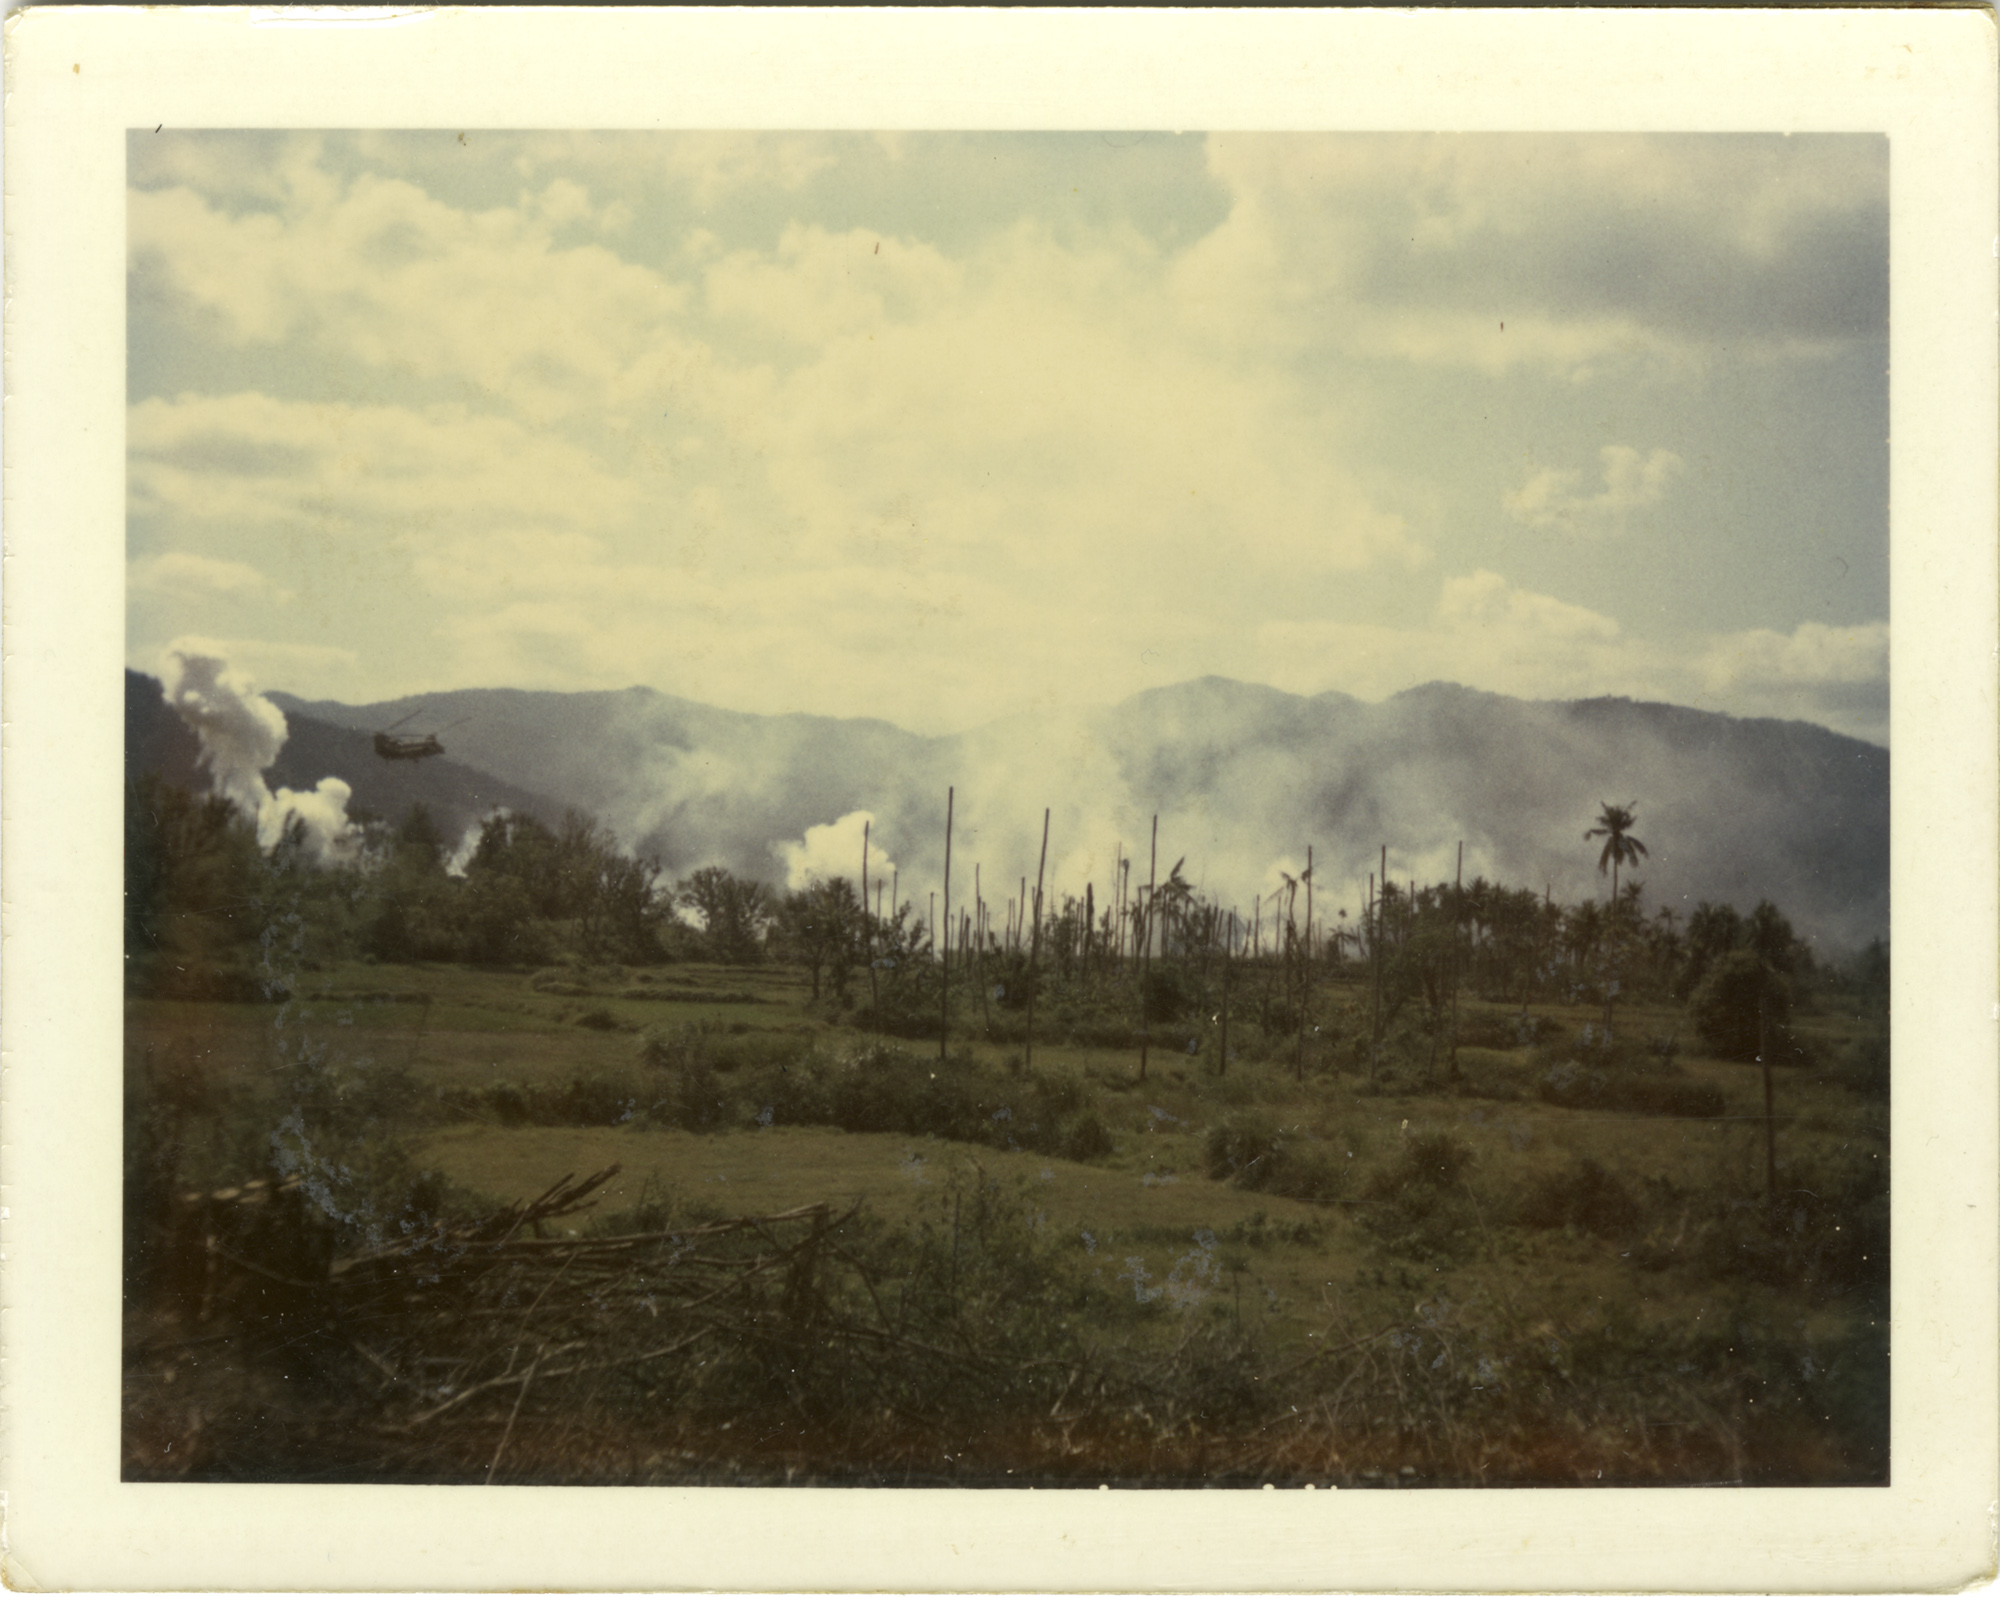 Photos of a green field with trees, smoke in the distance, and mountains beyond